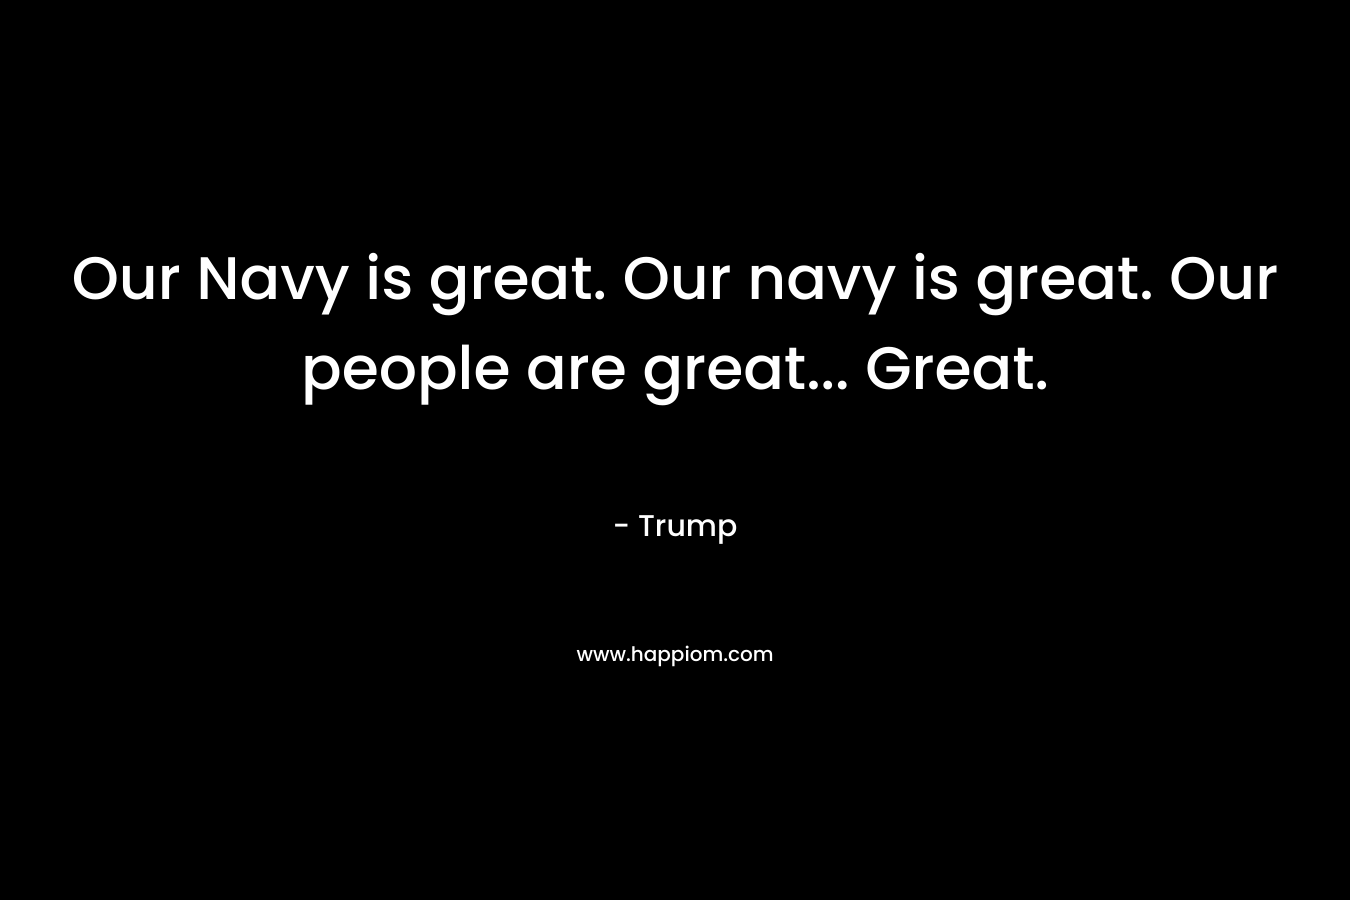 Our Navy is great. Our navy is great. Our people are great... Great.